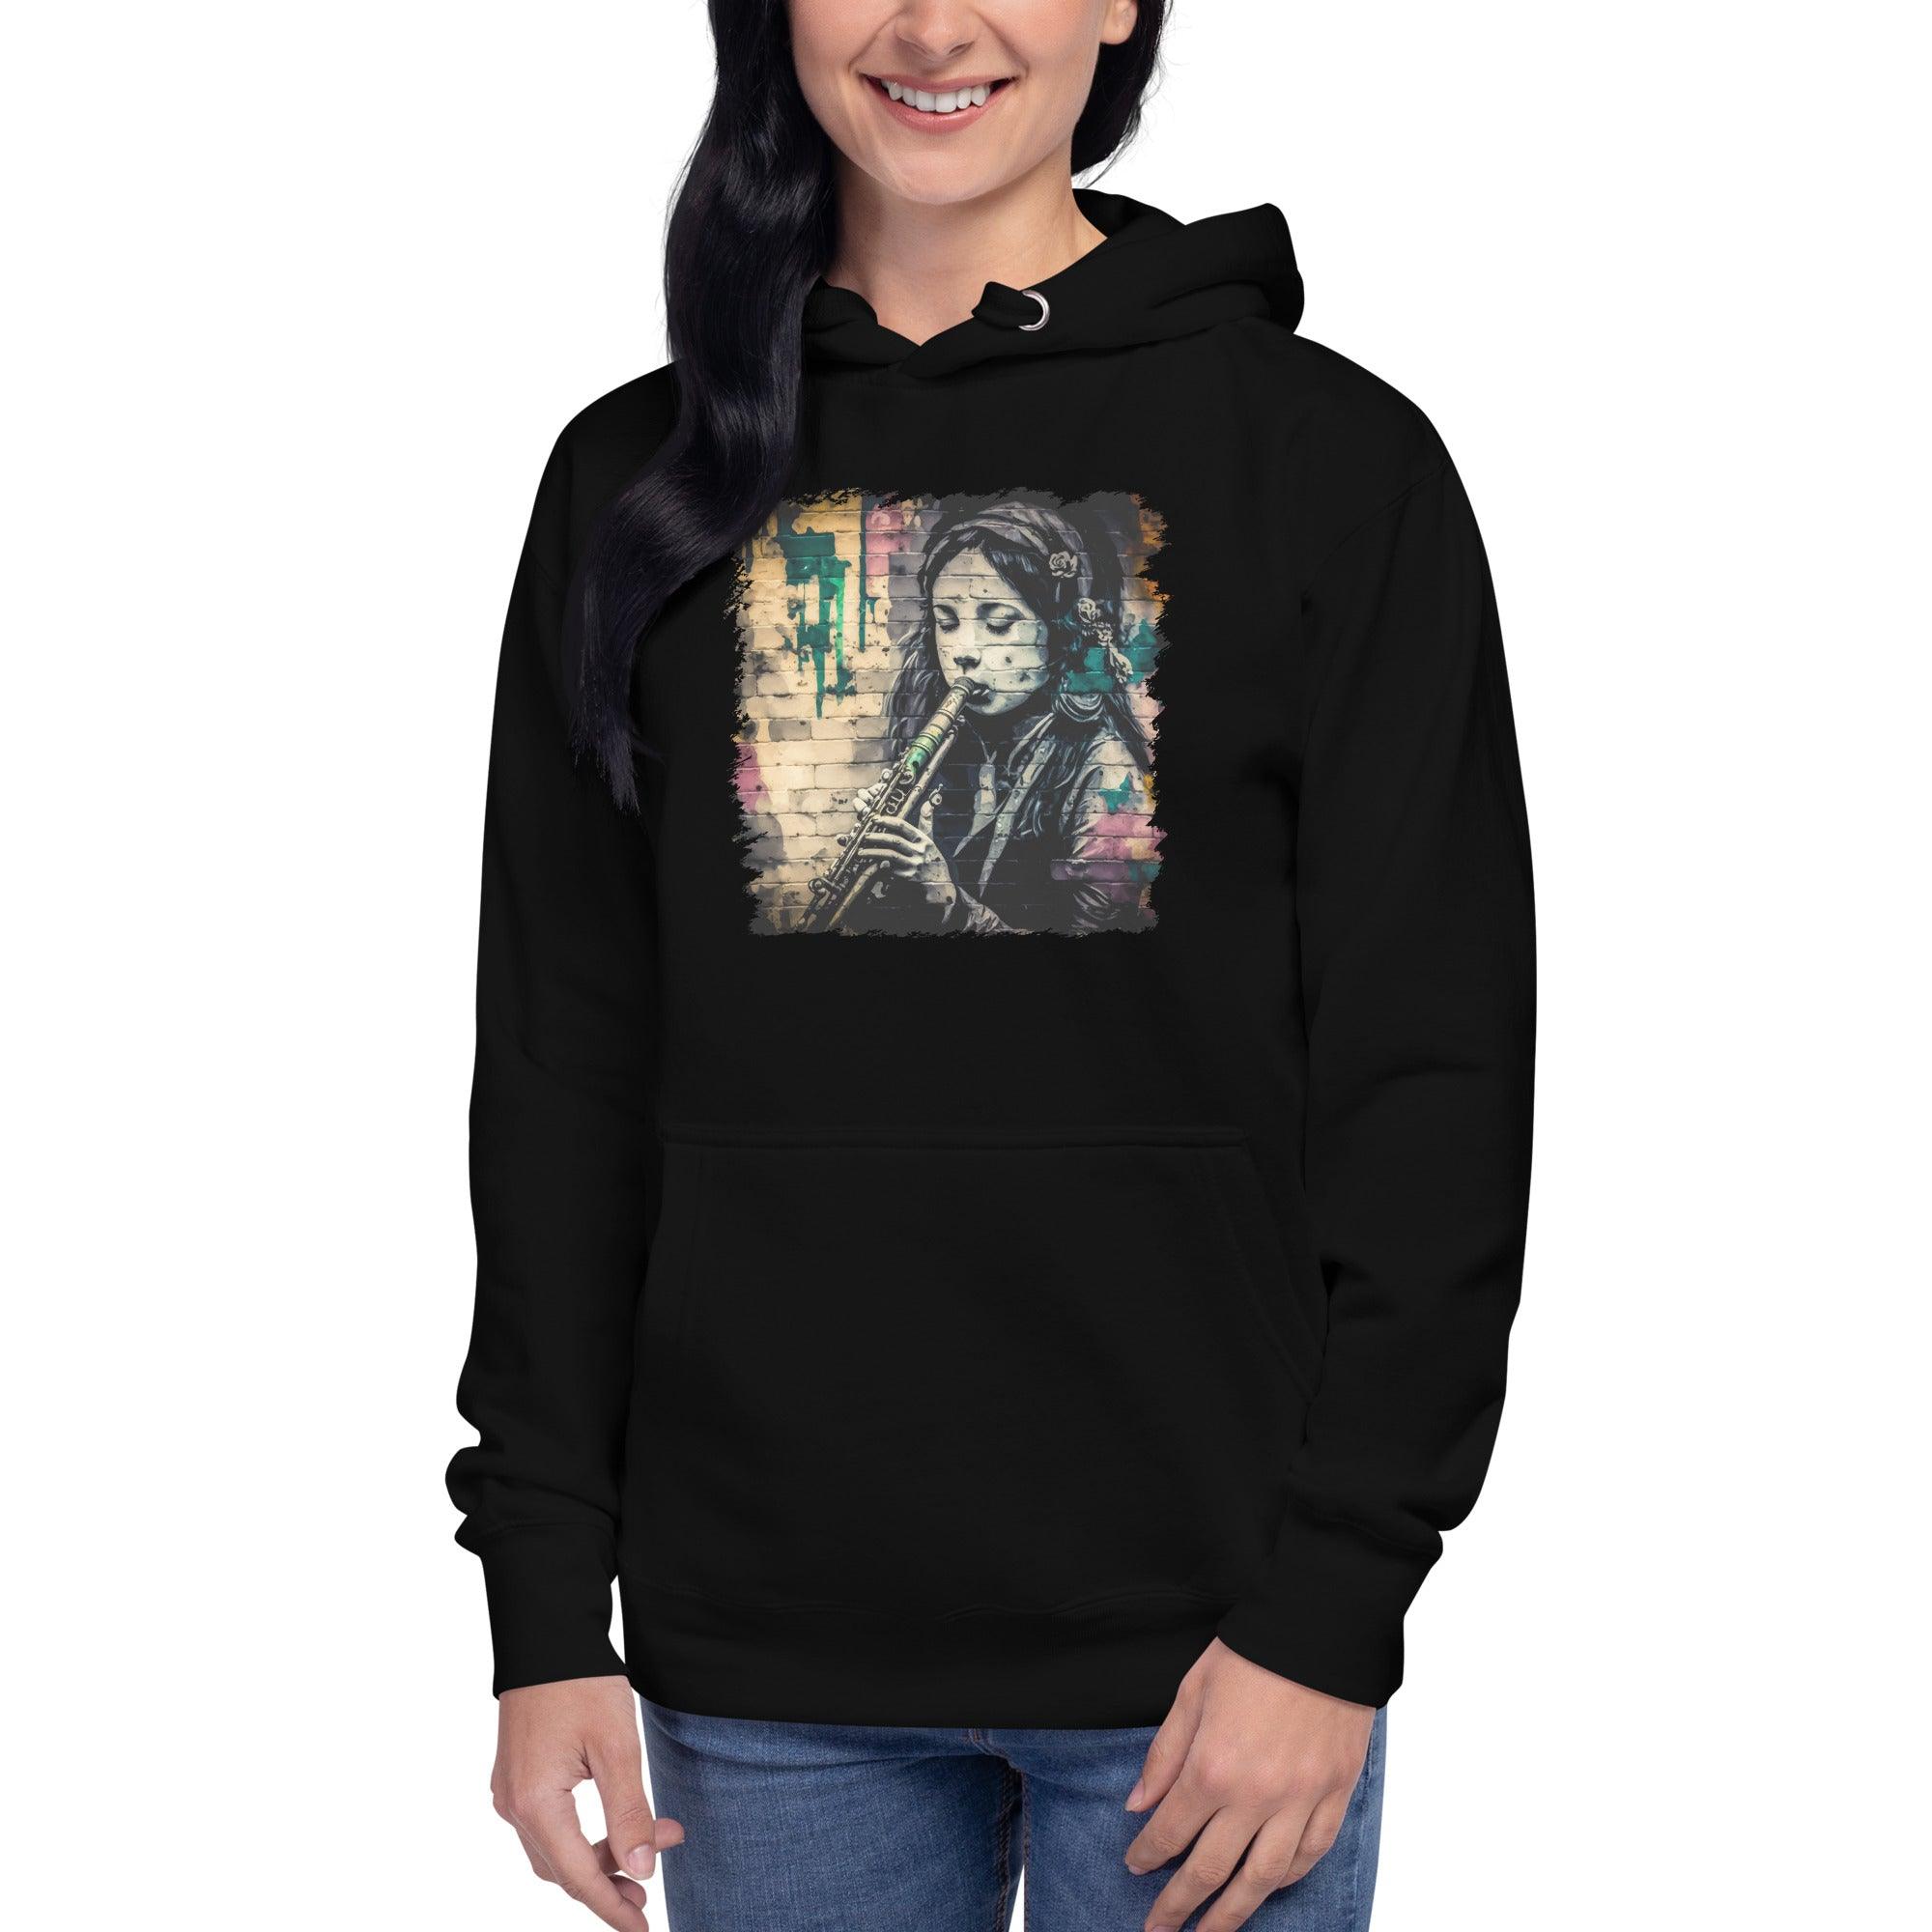 Breathing Life Into Music Unisex Hoodie - Beyond T-shirts